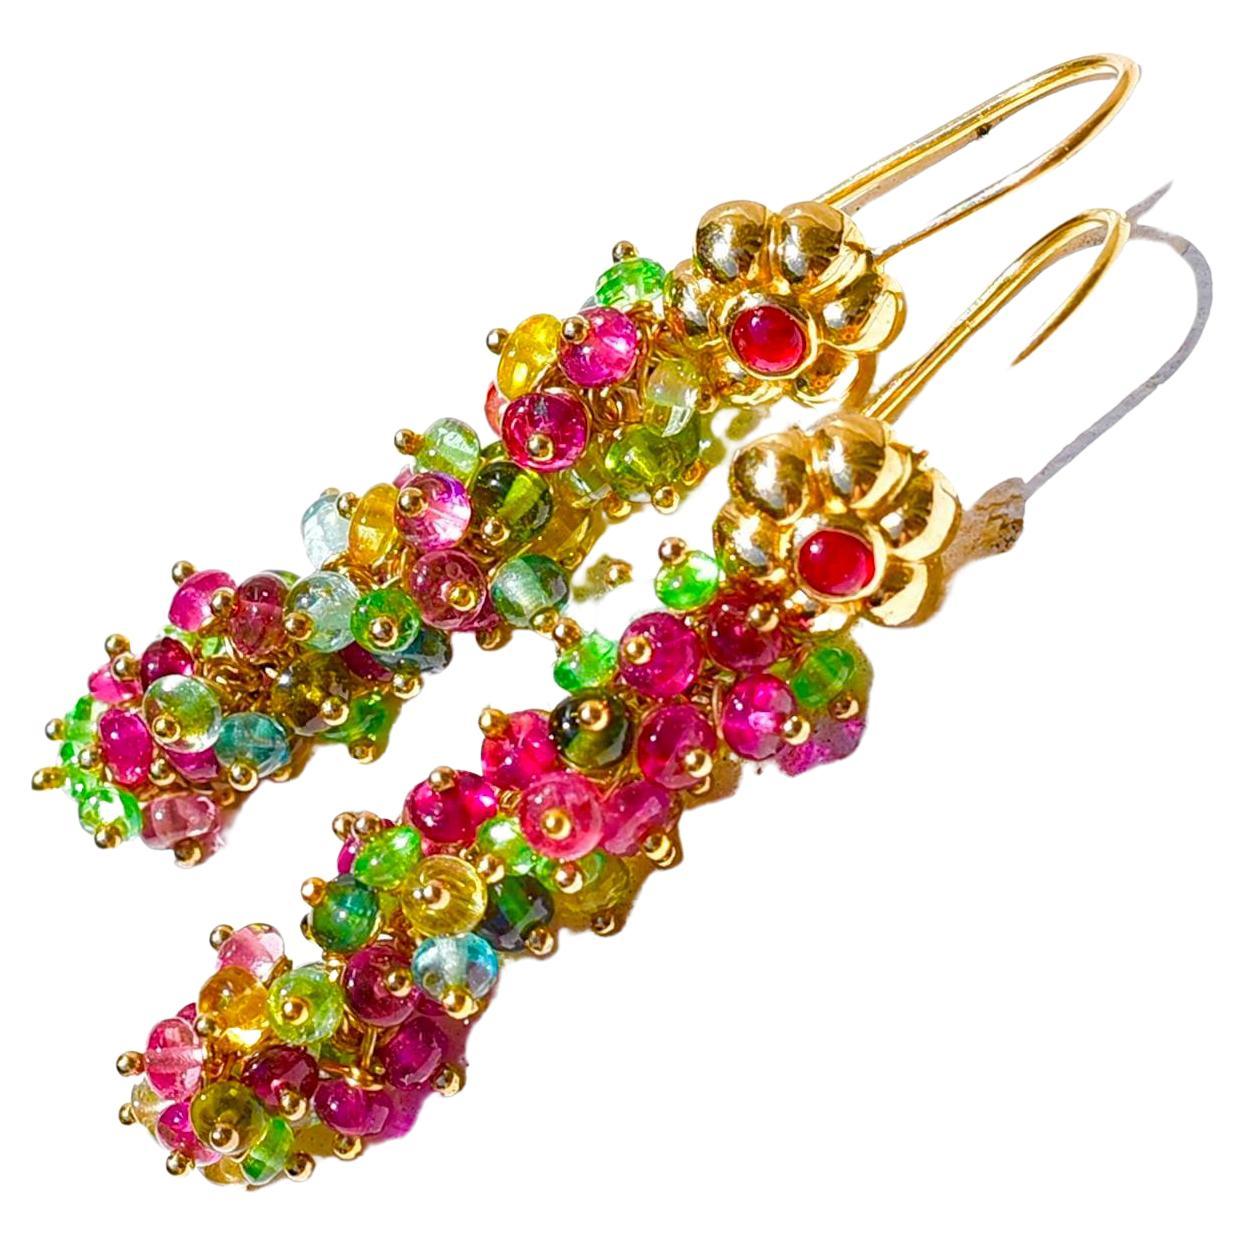 Multi-colored and shiny tourmaline beads have been capped with 18K Yellow Gold Natural Ruby ear wires. These earrings are the right touch of elegance for a special lady!